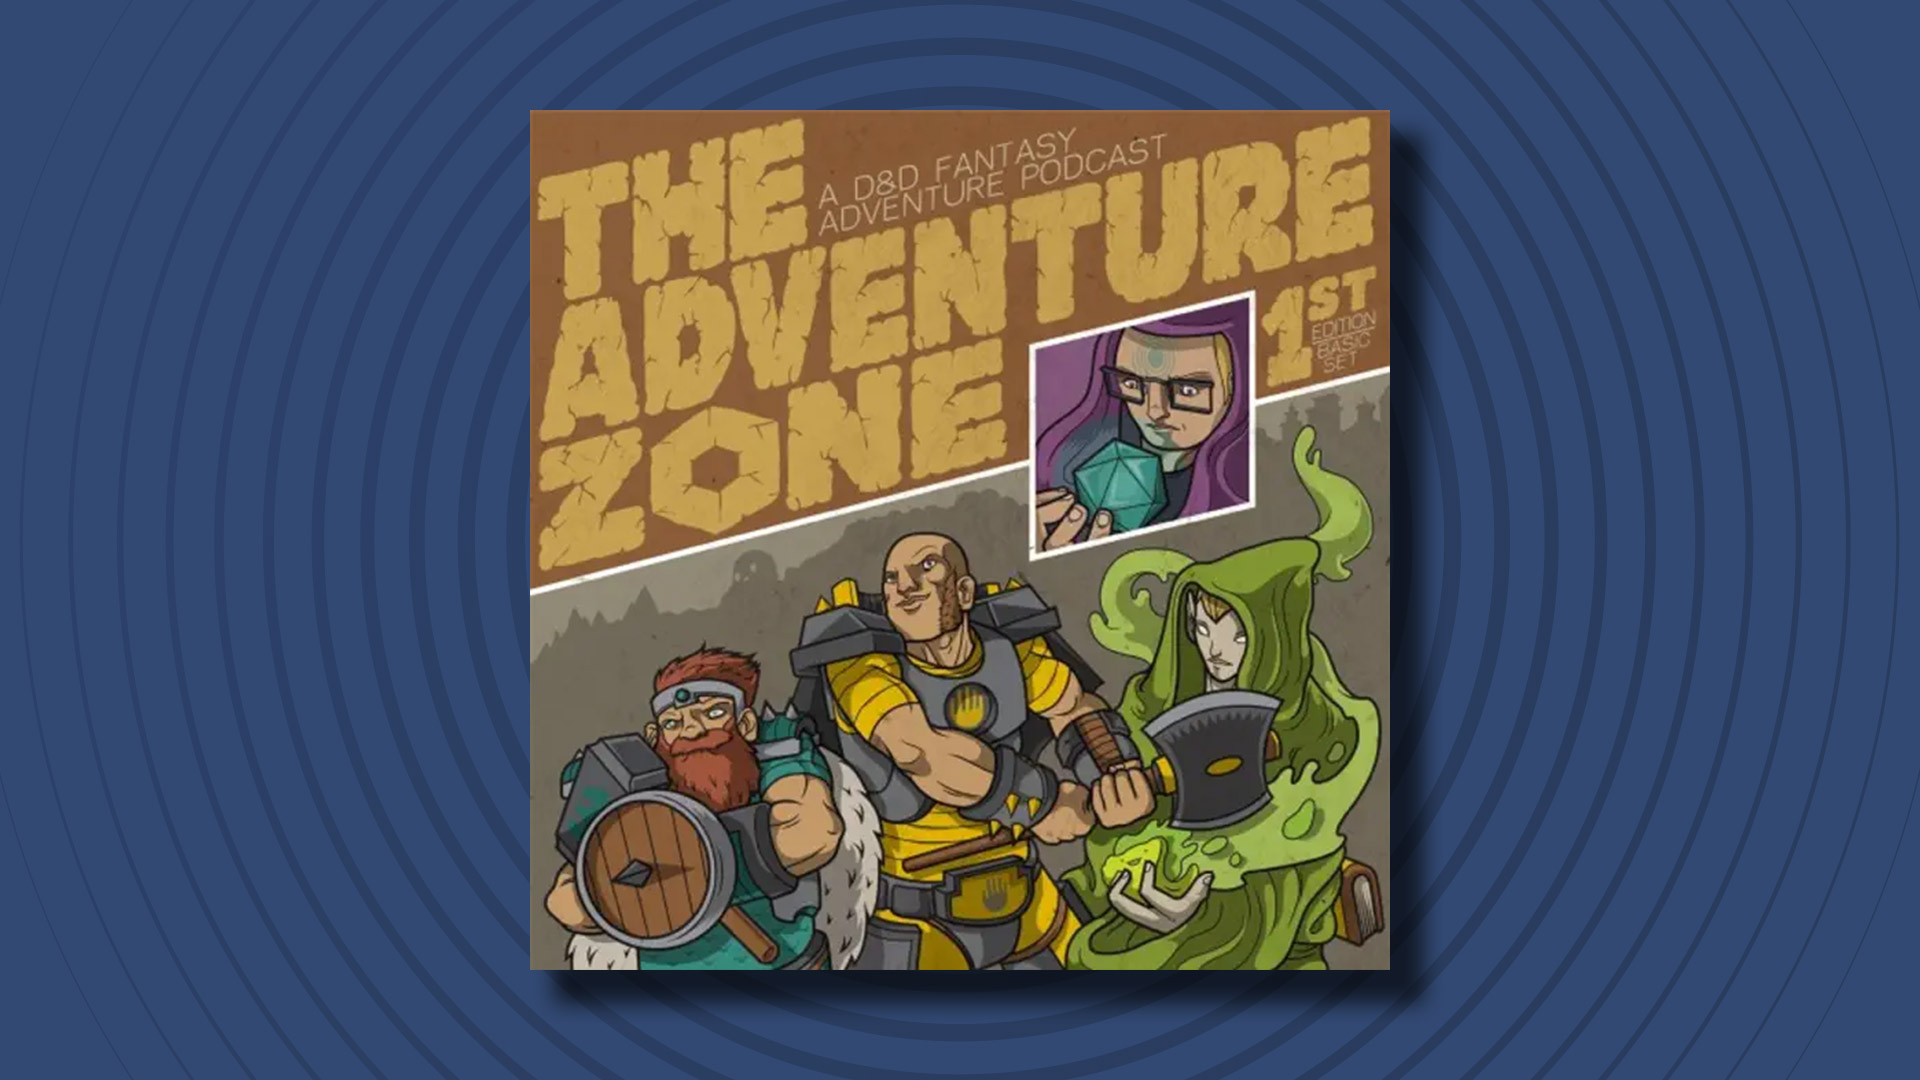 The logo of the Adventure Zone podcast on a dark blue background